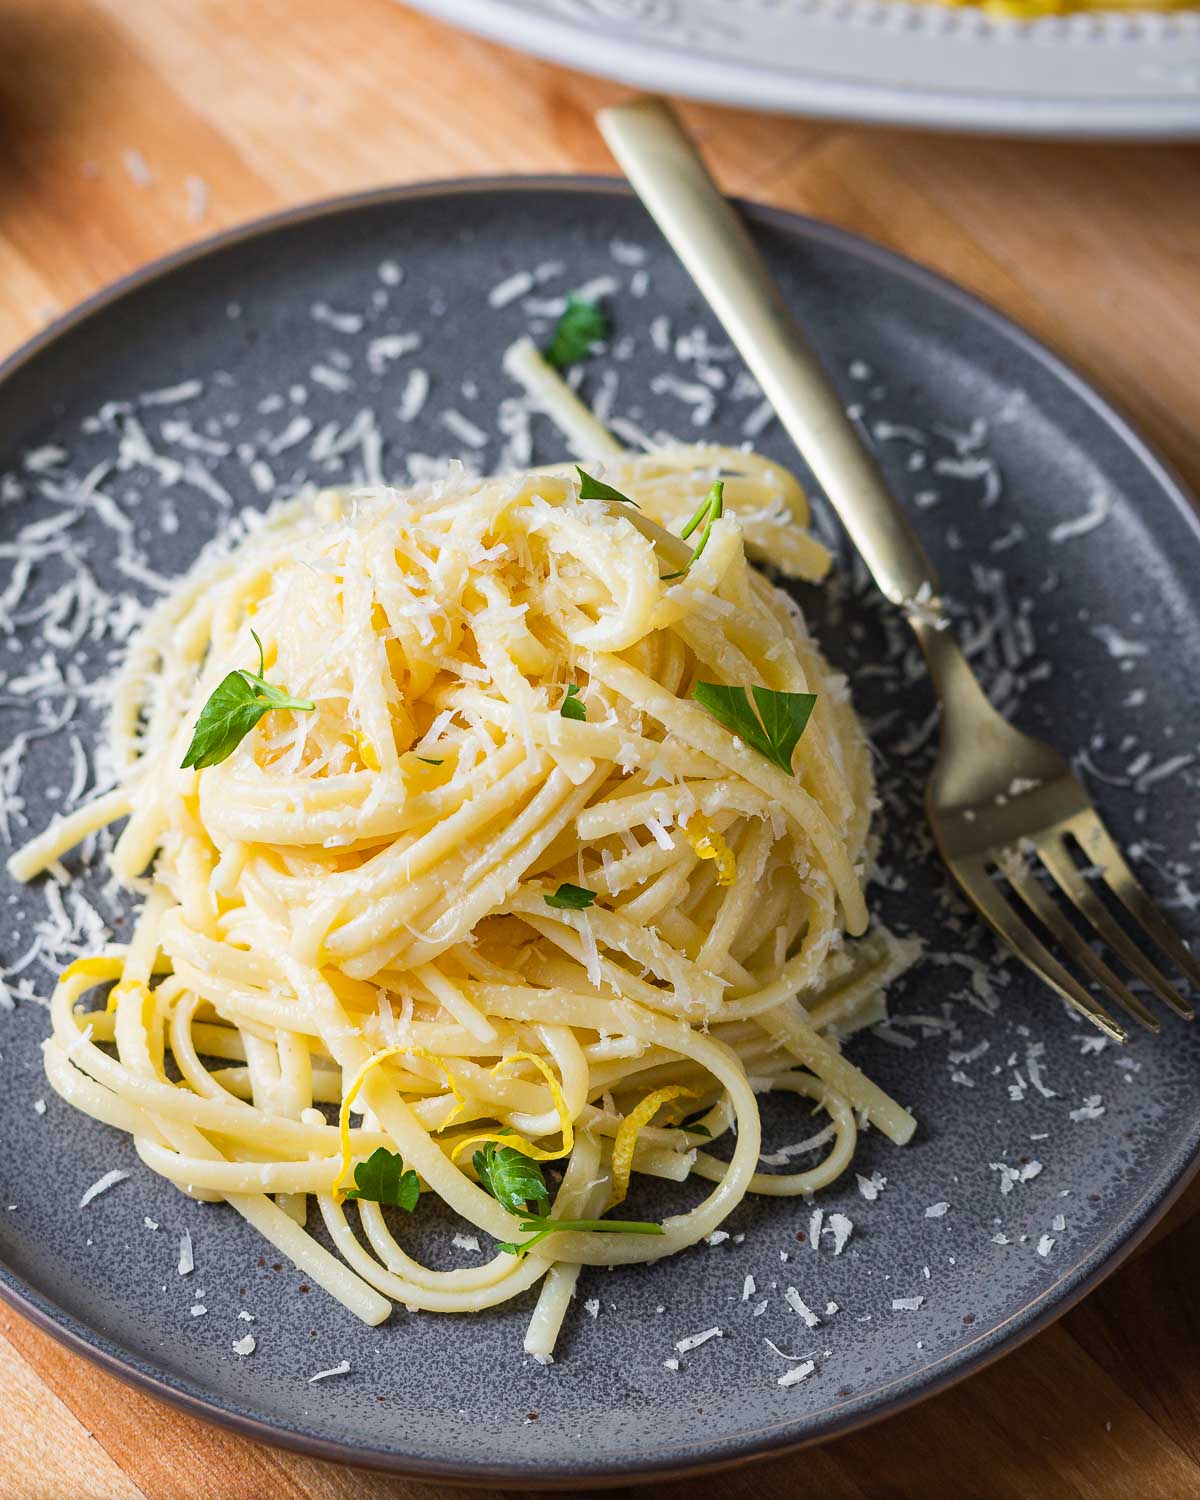 Linguine al limone in grey plate with sprinkled parsley.